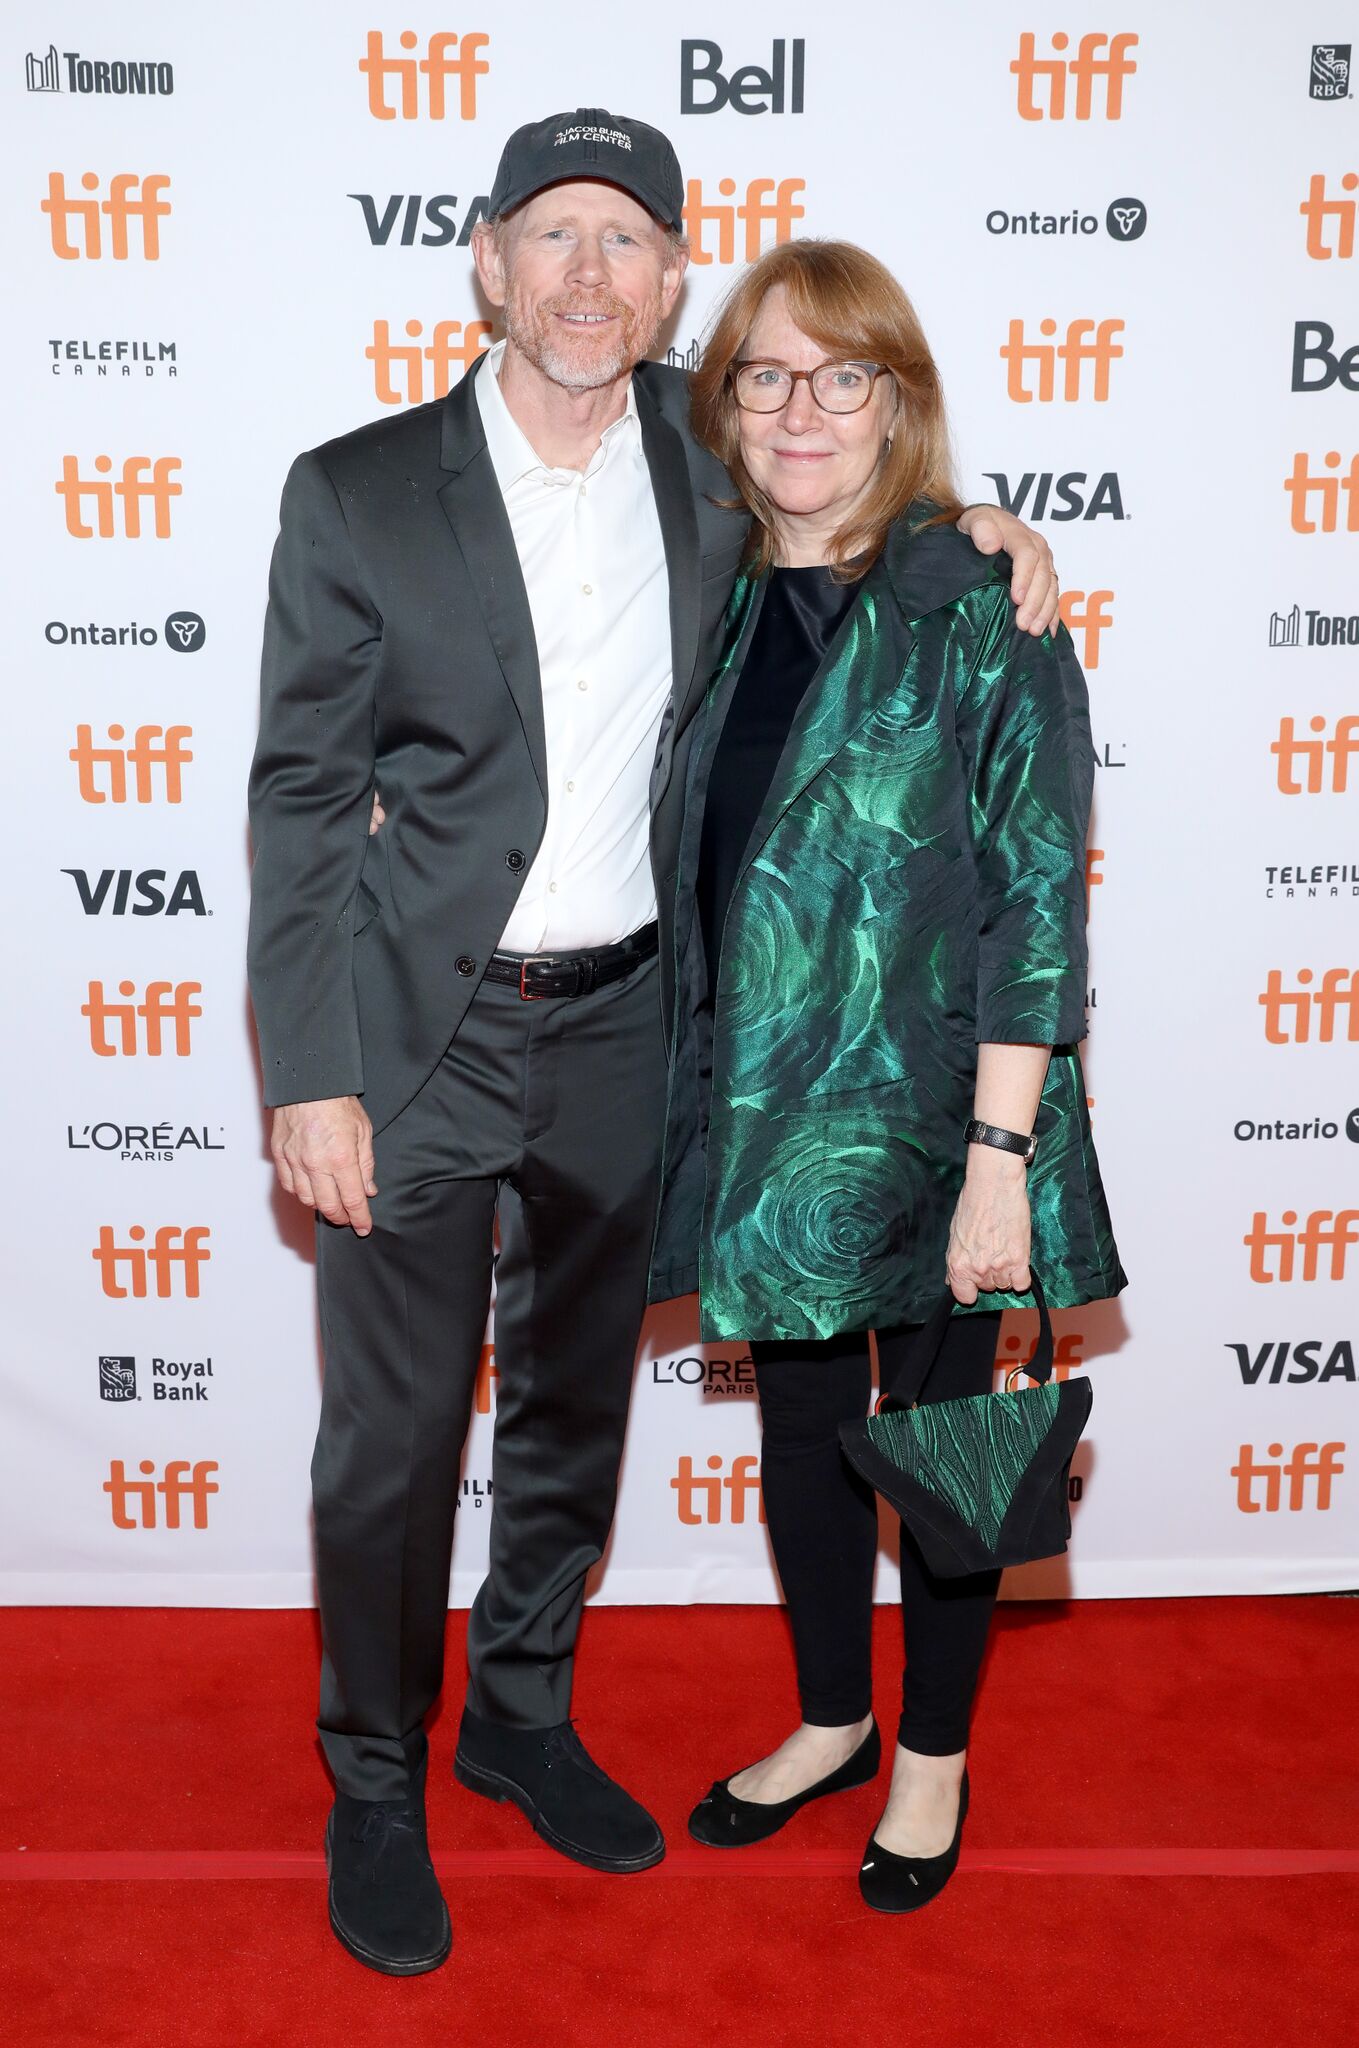  Ron Howard and Meredith Kaulfers attends the "Dads" premiere during the 2019 Toronto International Film Festival | Getty Images